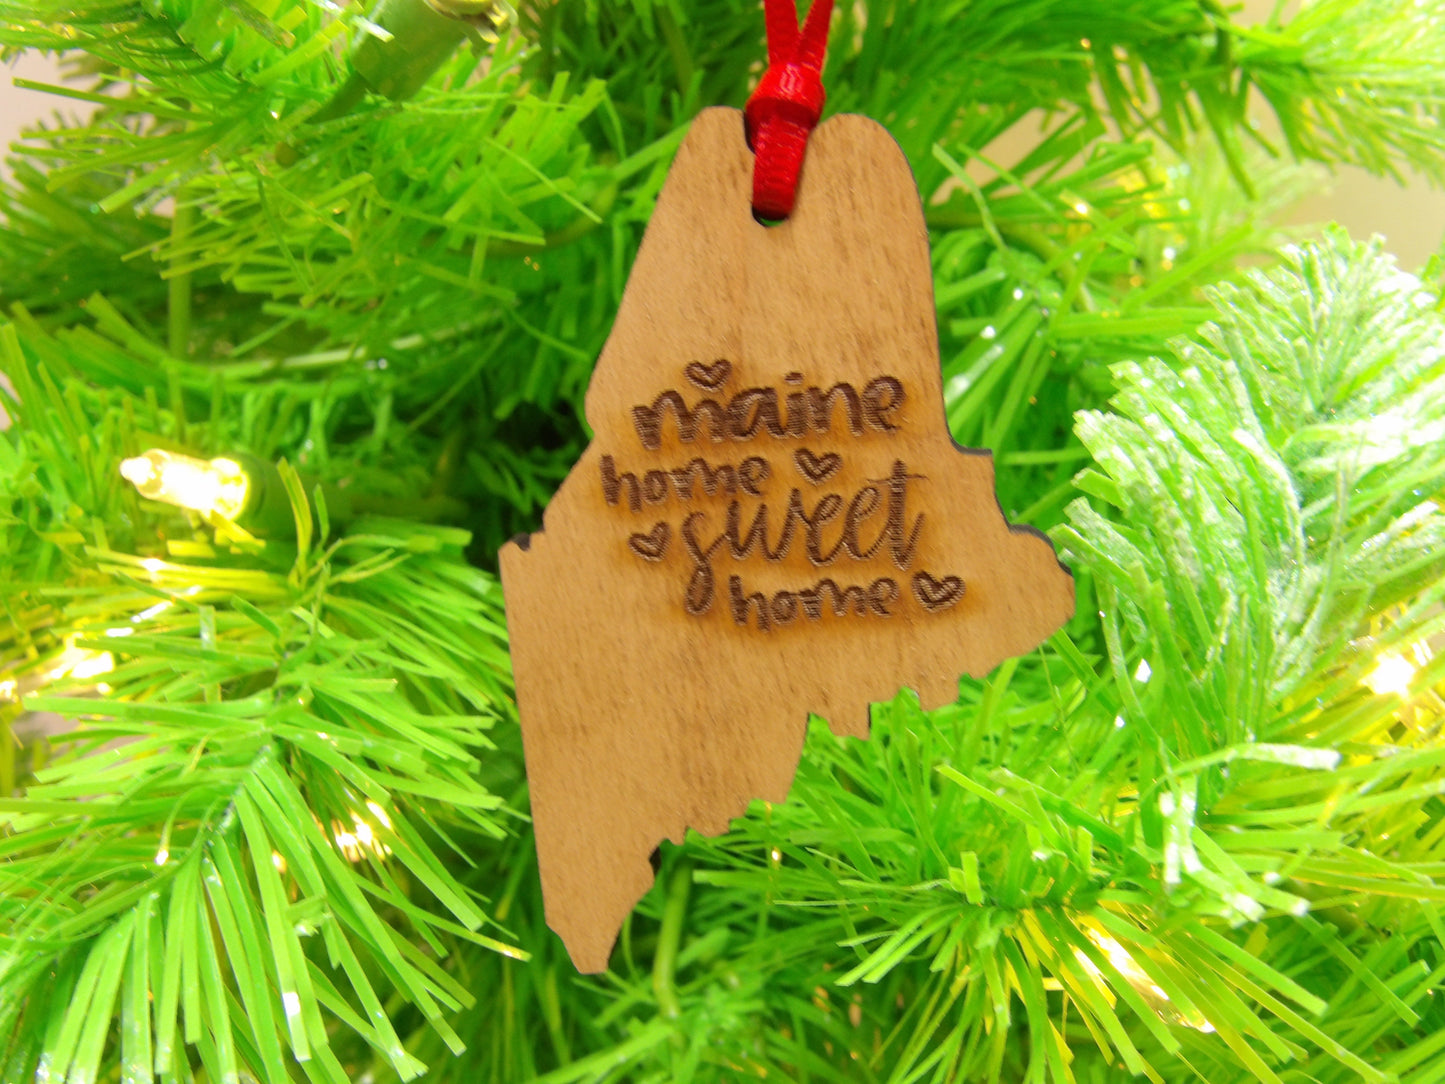 State of Maine Home Sweet Home Wooden Christmas Tree Ornament